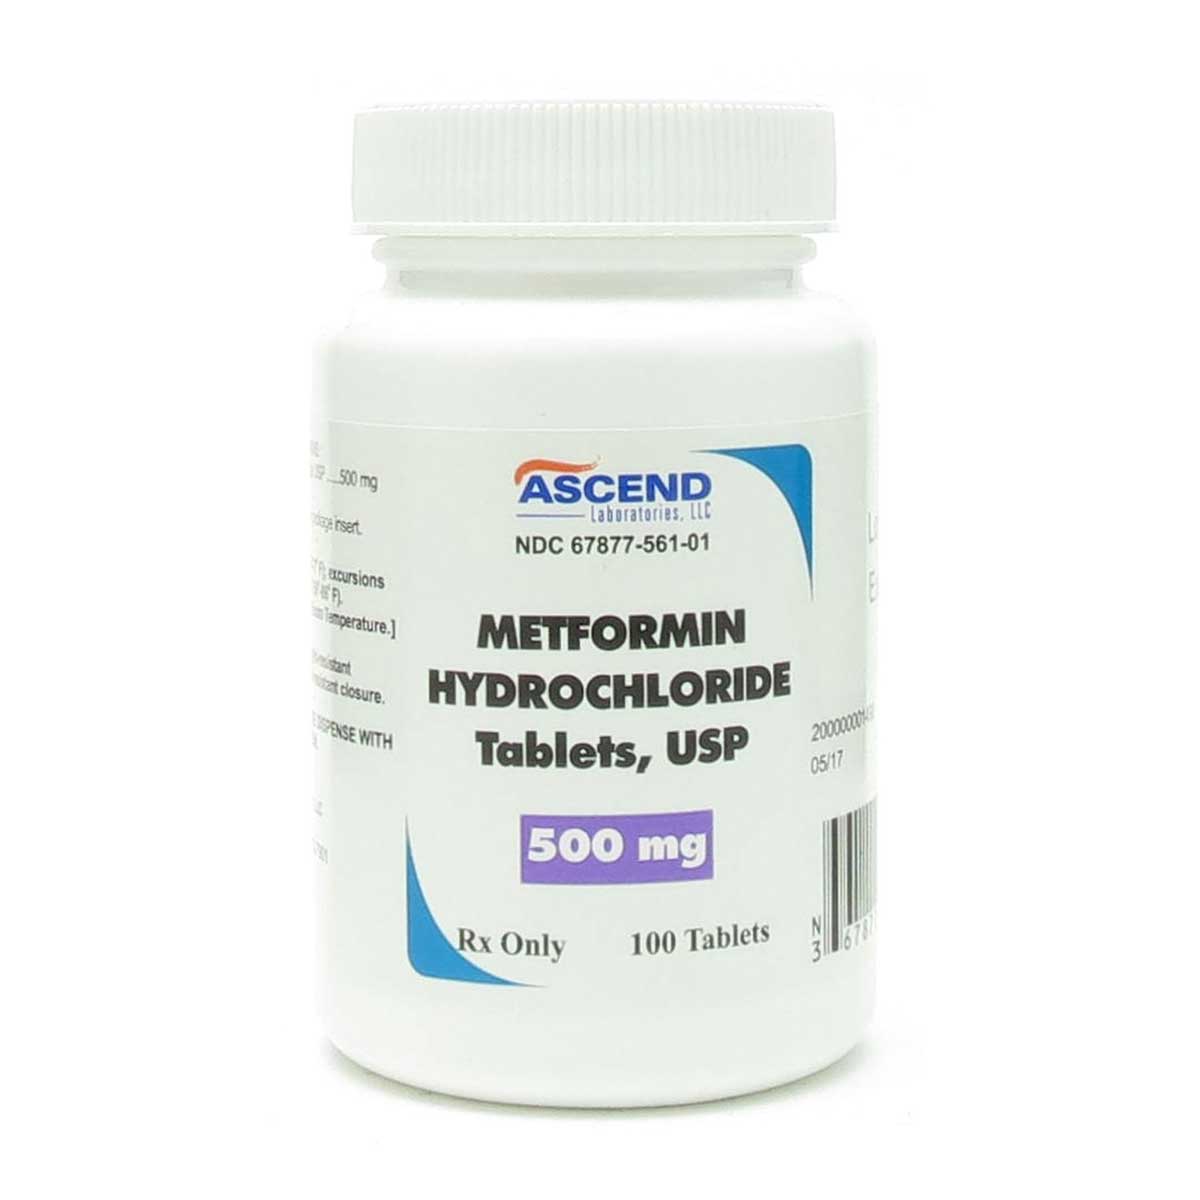 The effects of oral metformin may have been limited because of the nature of the advanced stage of AMD included within the patient population. 